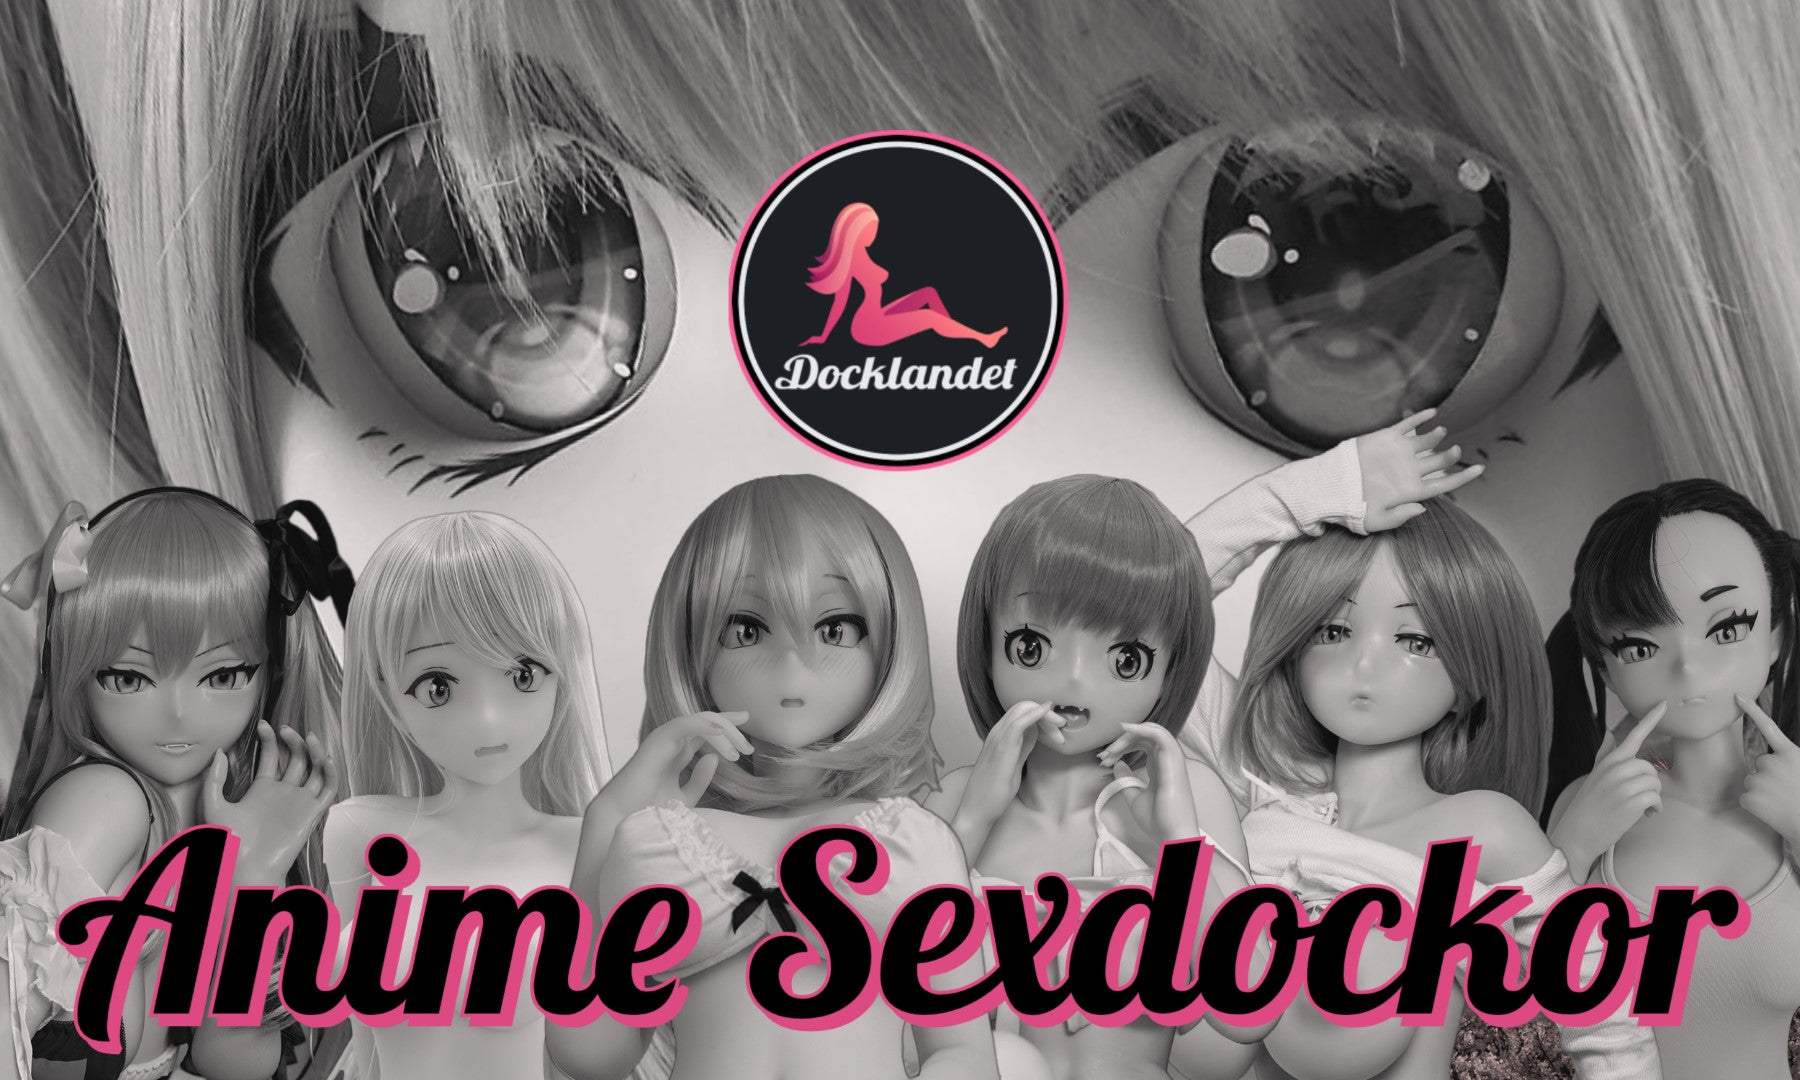 Anime sex dolls from Irokebijin. Docklandet has several anime sex dolls with fantasy style in stock!